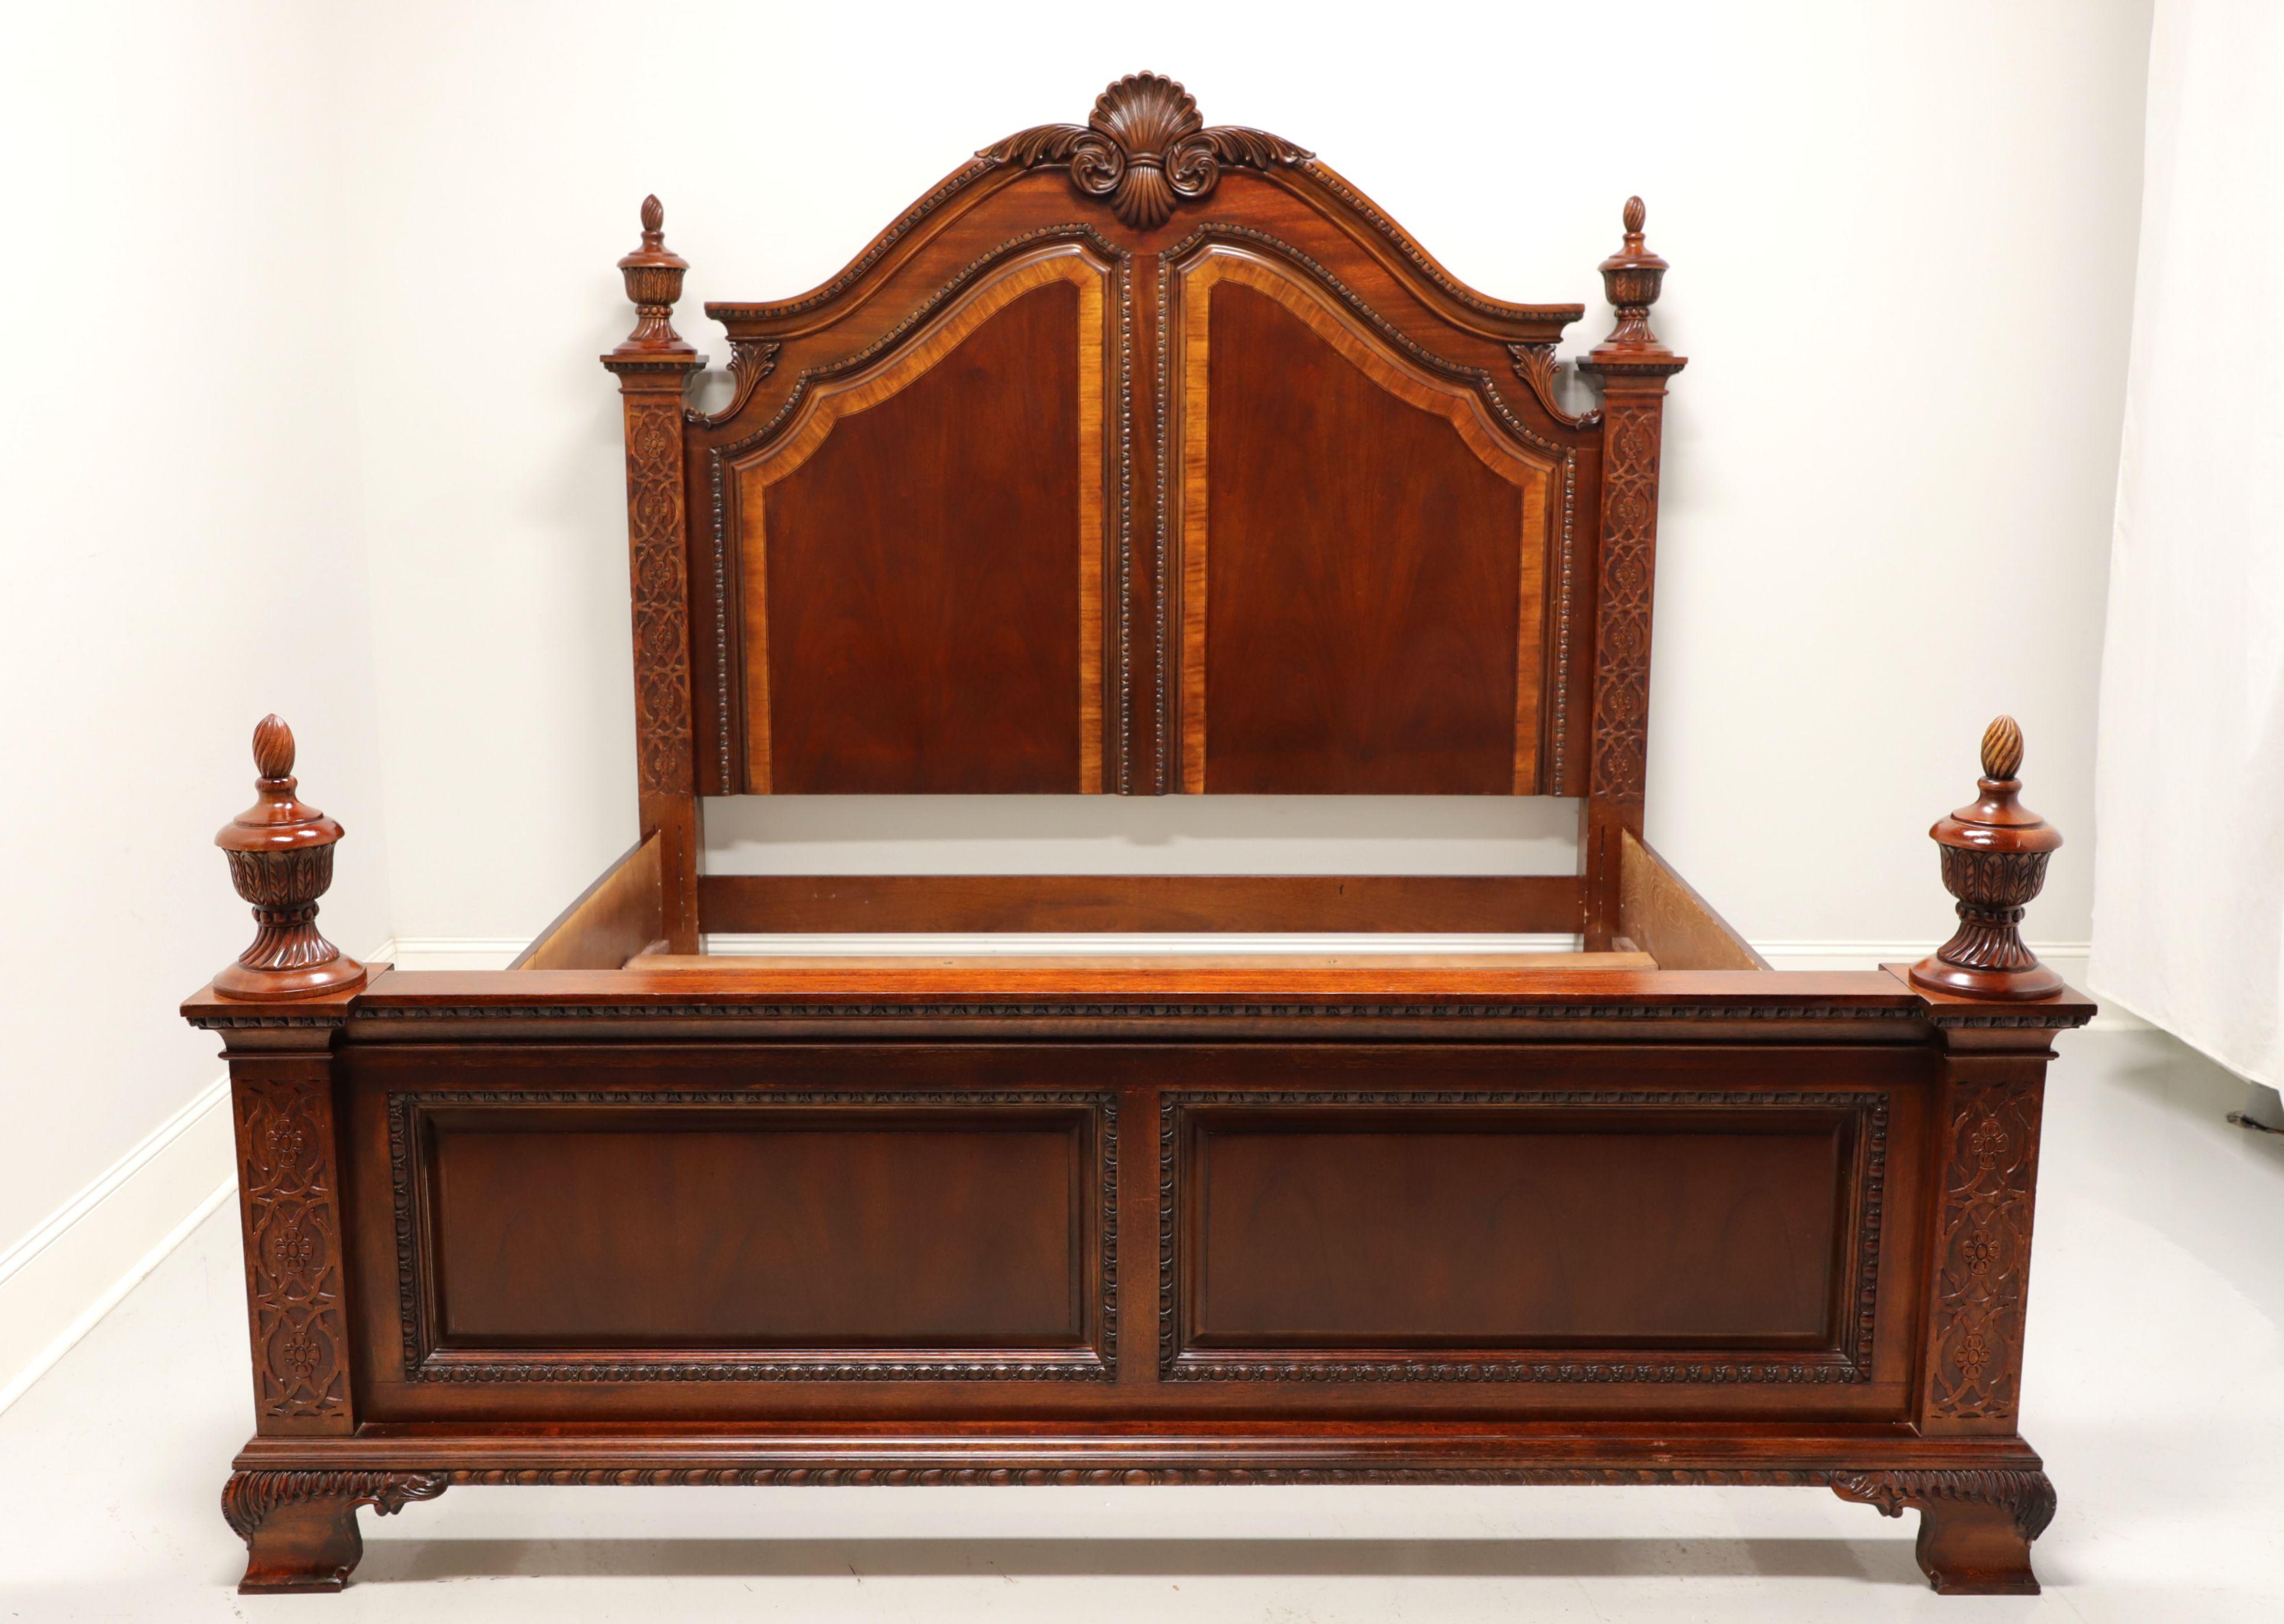 A king size panel bed in the Traditional Victorian style, unbranded. Mahogany with veneers. Tall headboard has an arced top with carved shell to center and decorative fretwork to square side posts with large finials. Low footboard with wide flat top